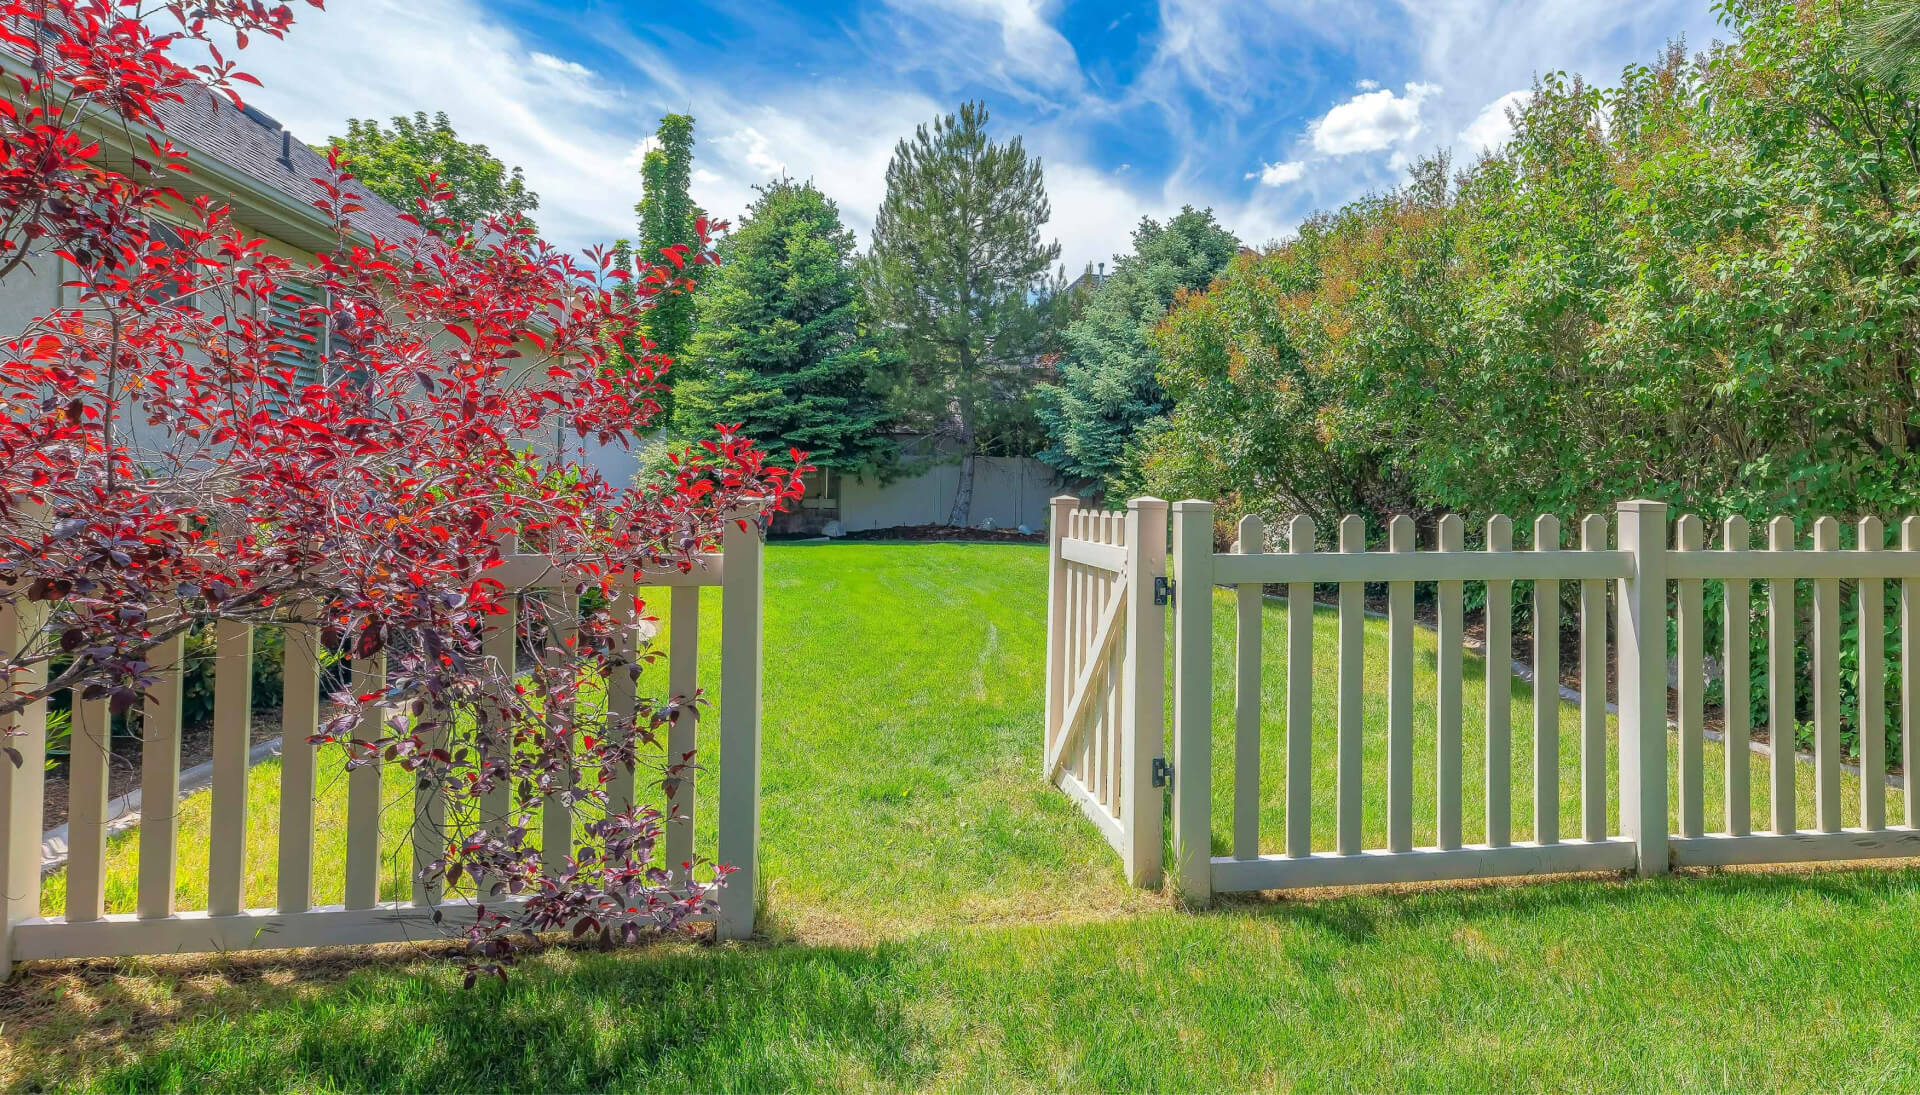 A functional fence gate providing access to a well-maintained backyard, surrounded by a wooden fence in Sacramento